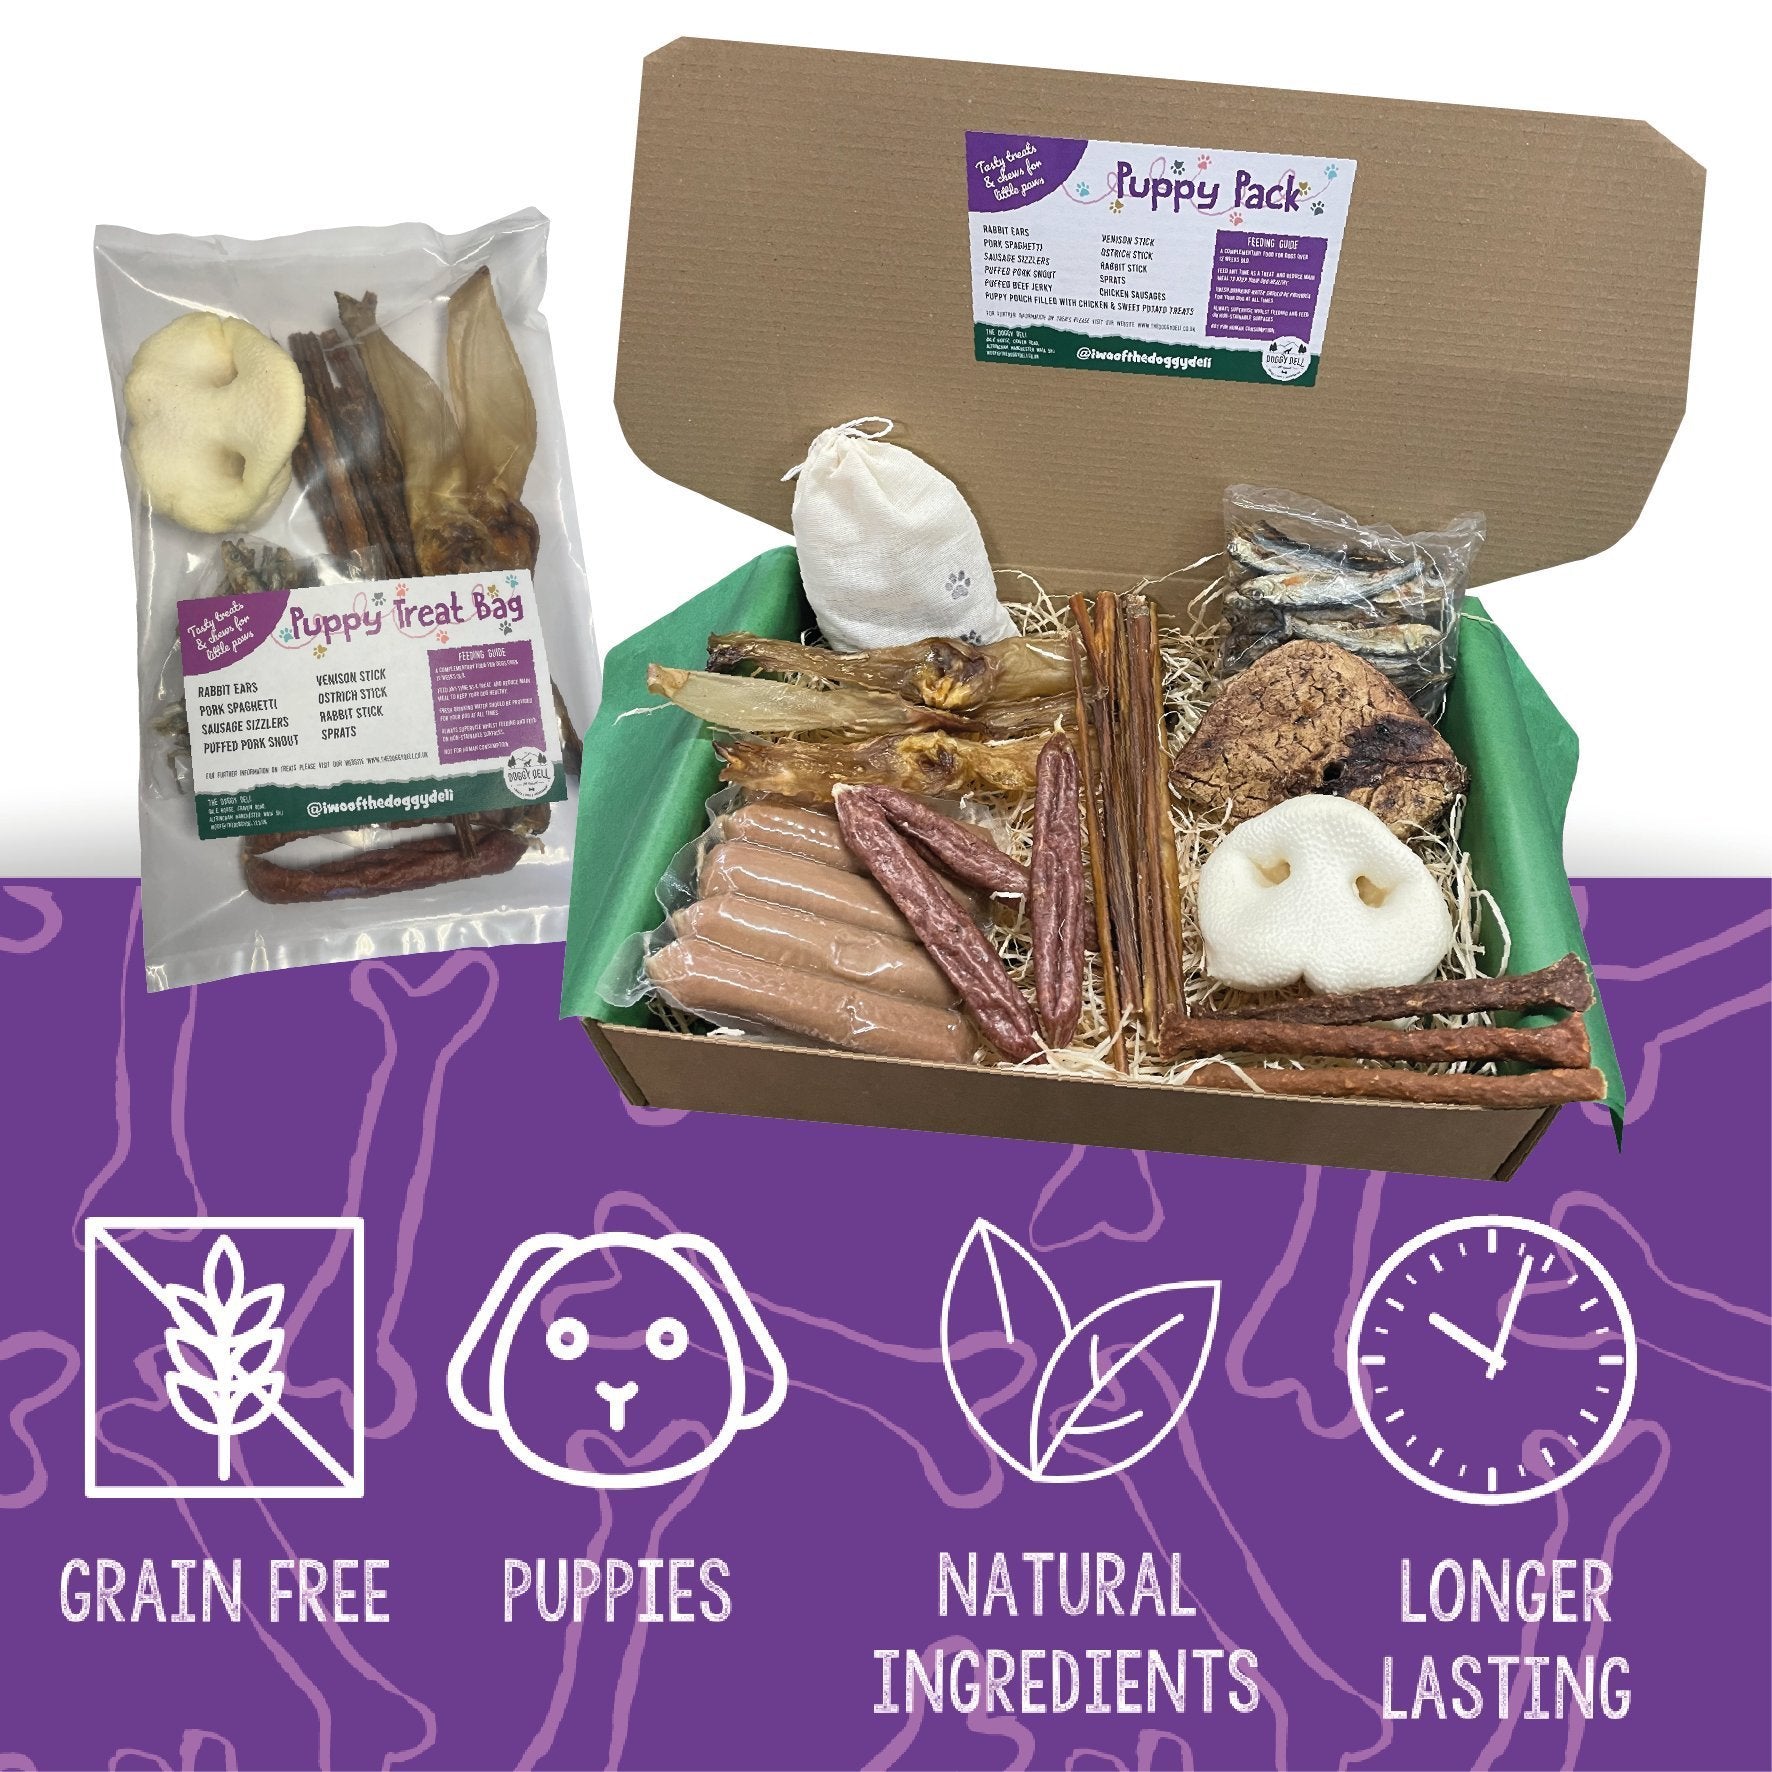 Puppy Pack - Natural Treat Selection Box and Bags for Puppies and Smaller Dogs | The Doggy Deli